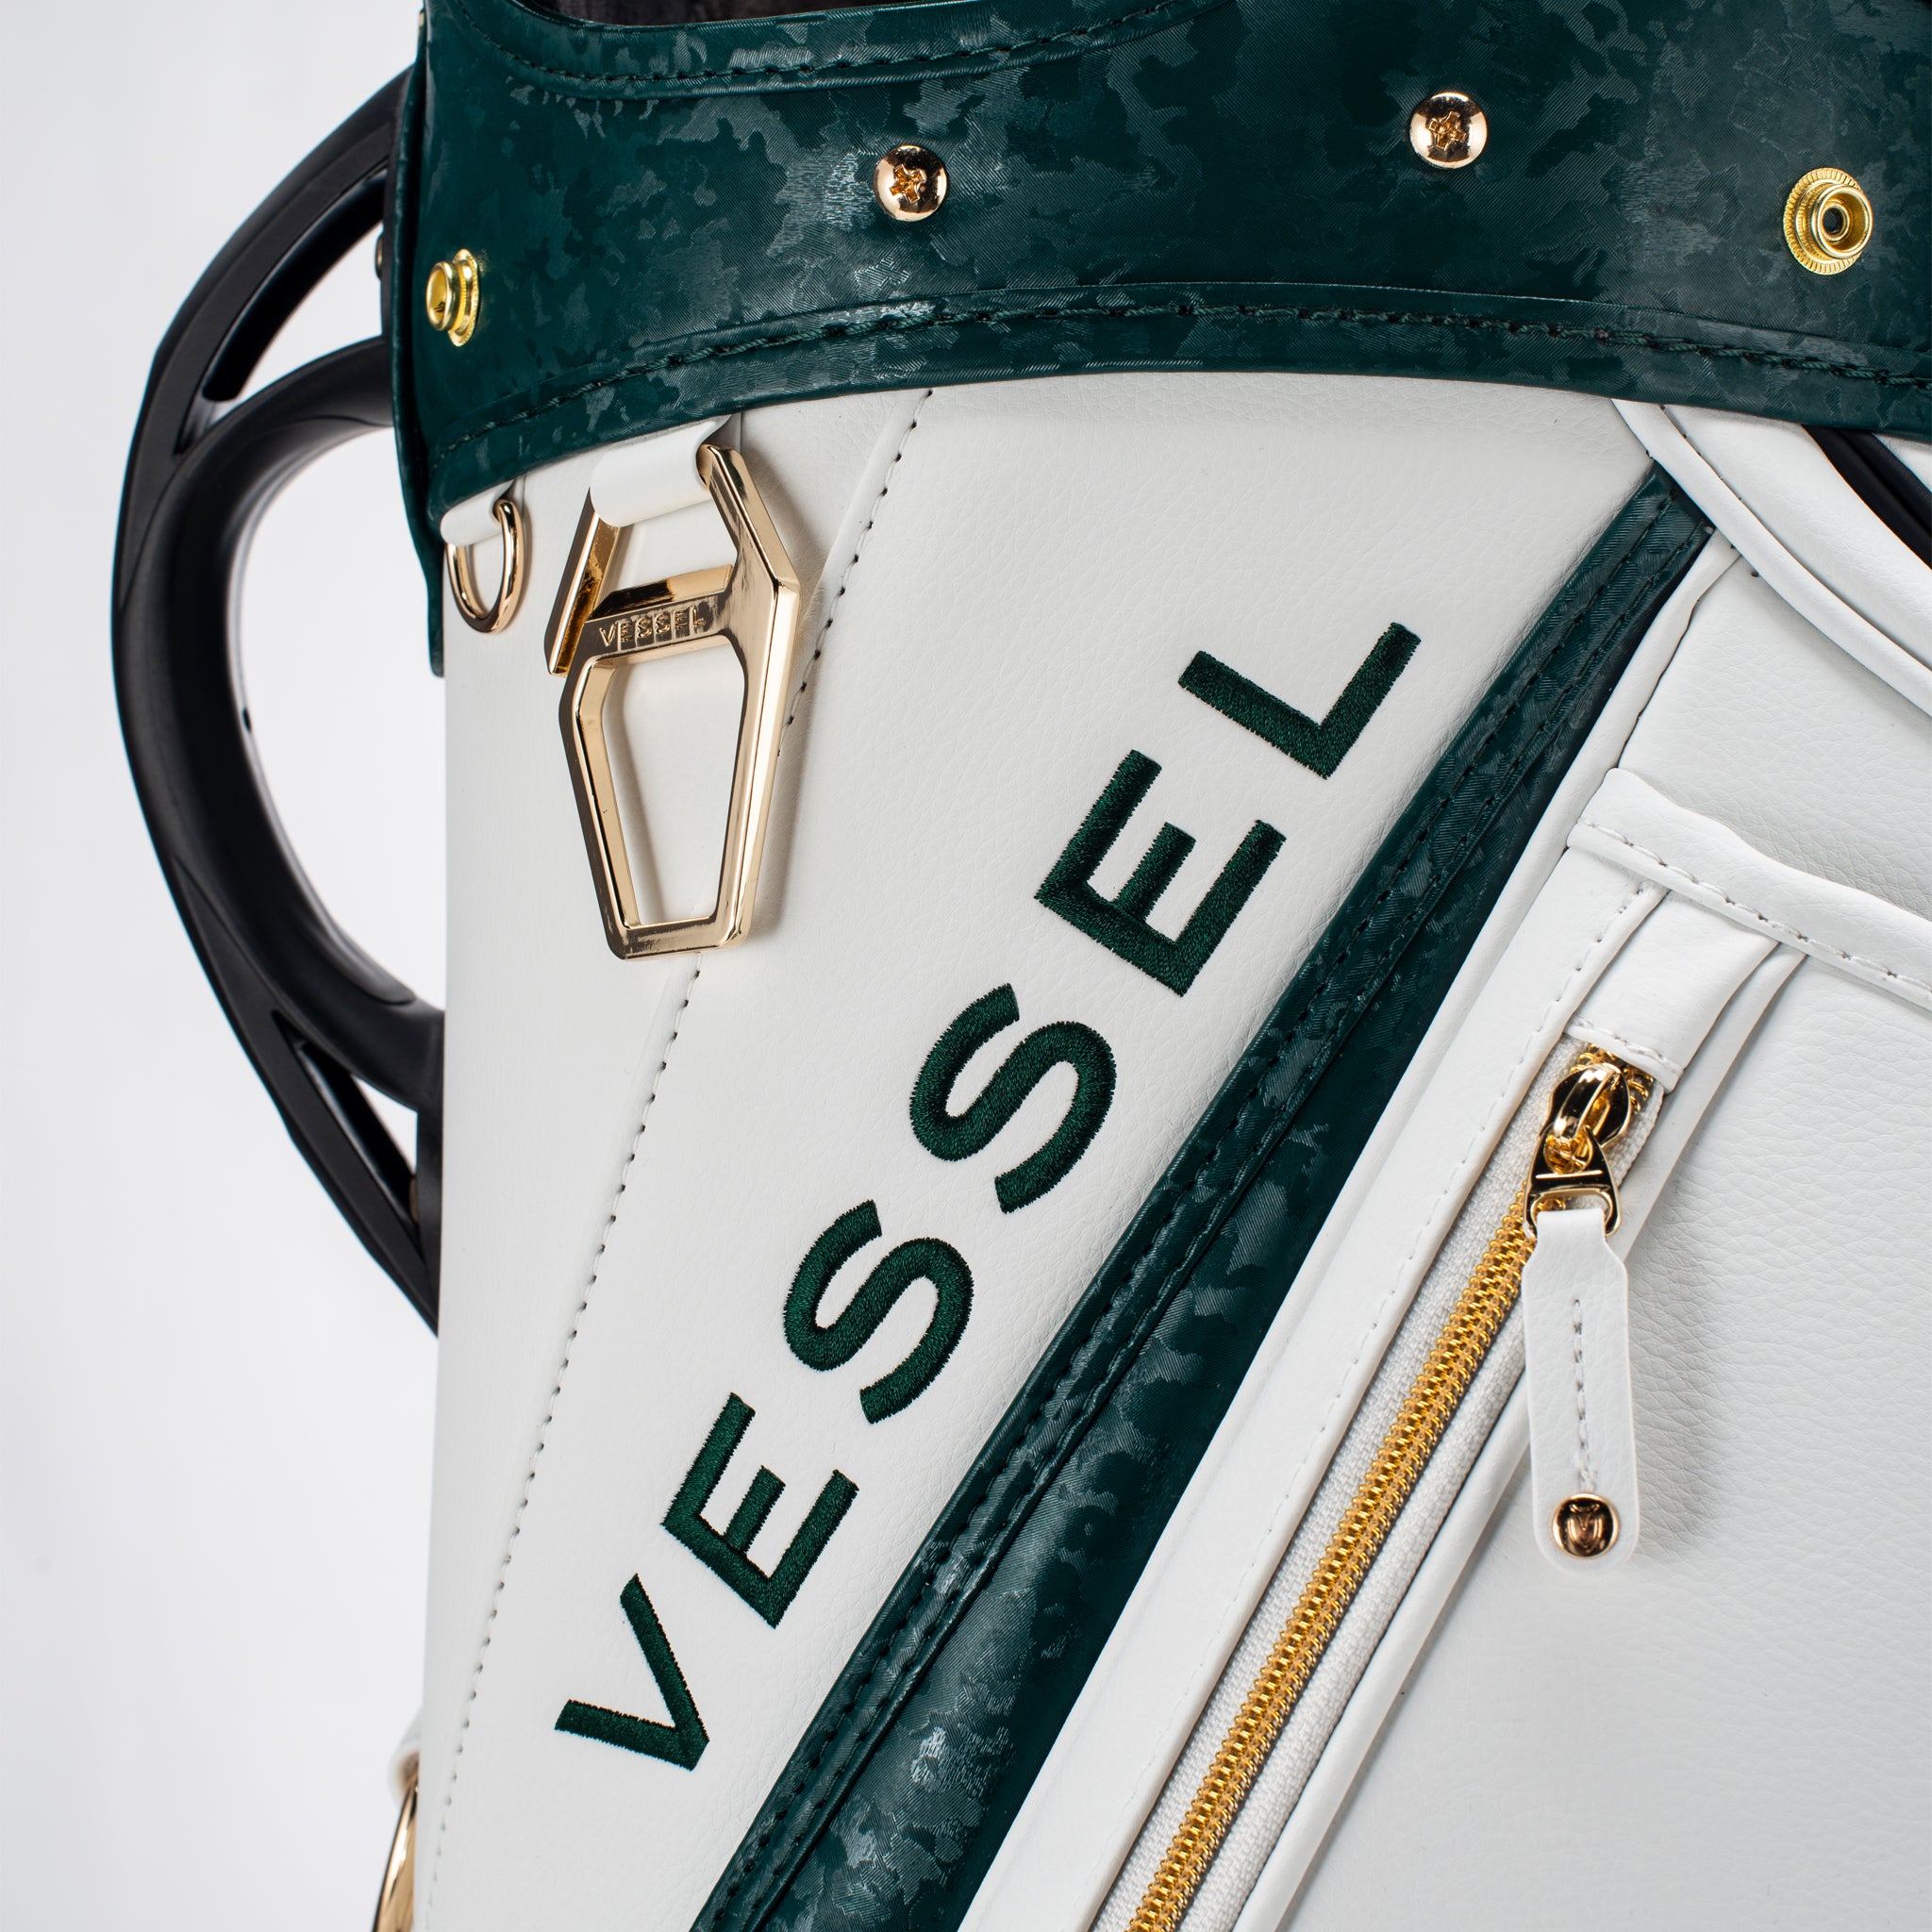 Vessel Prime Staff Bag: Carry Your Clubs Like a Pro – WiscoGolfAddict